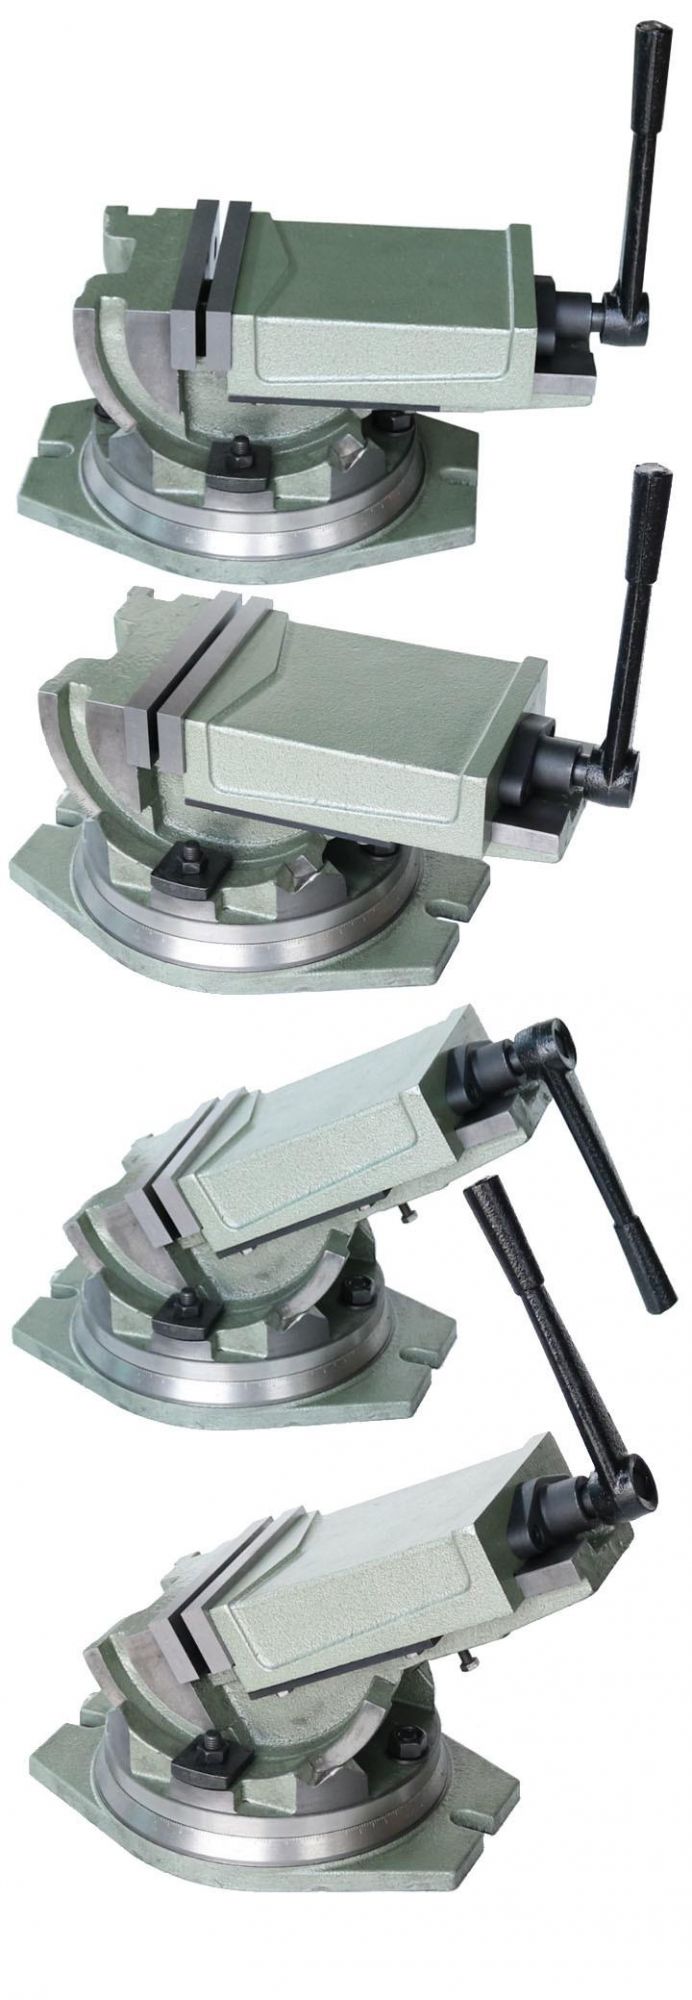 3 Axis Tilting Vise with Swivel Base